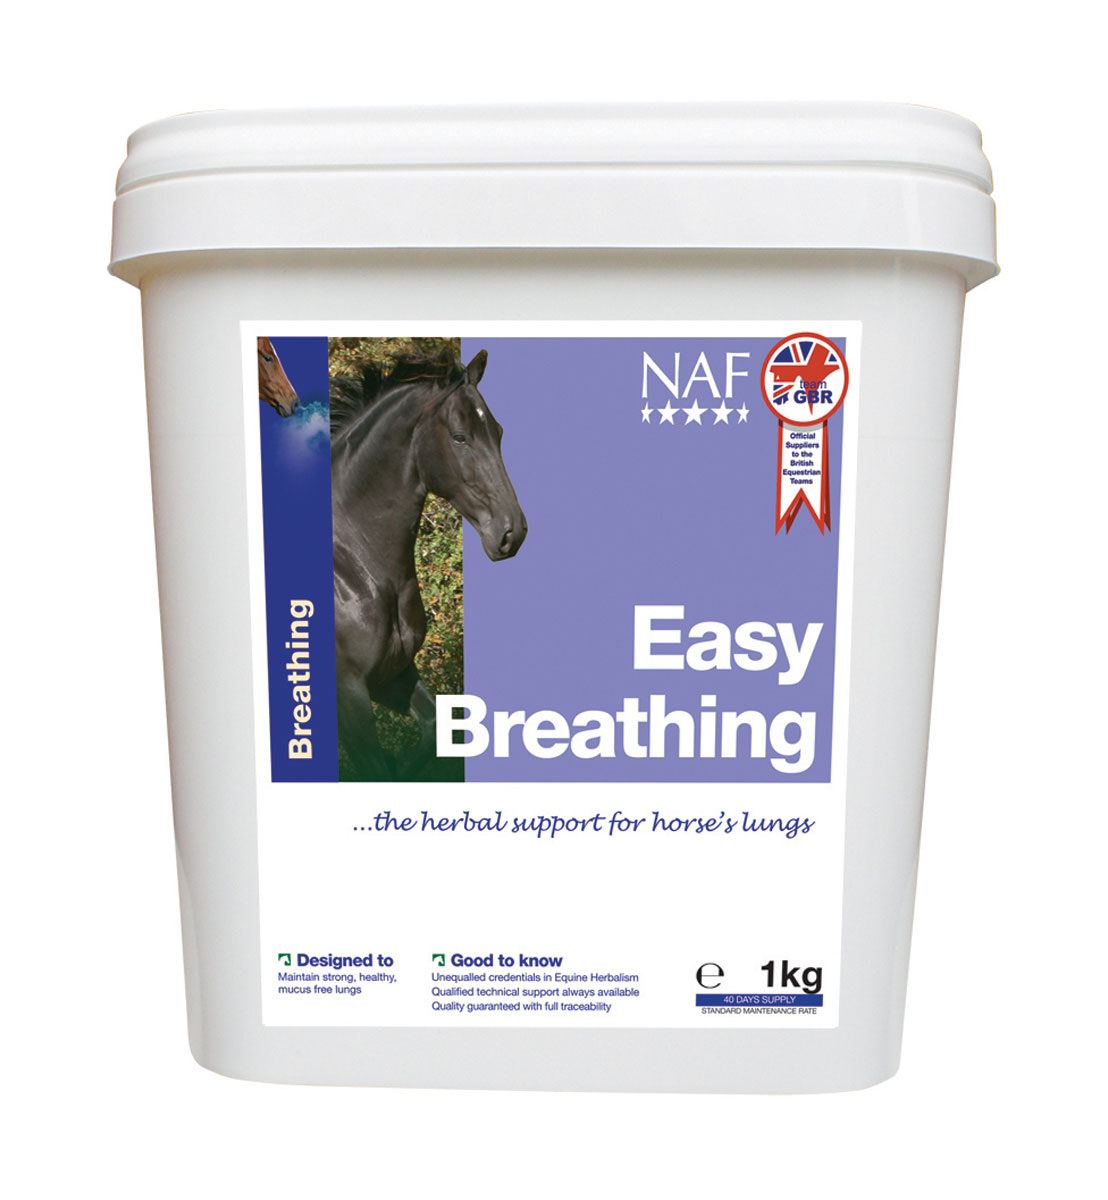 Breathing Click & Collect